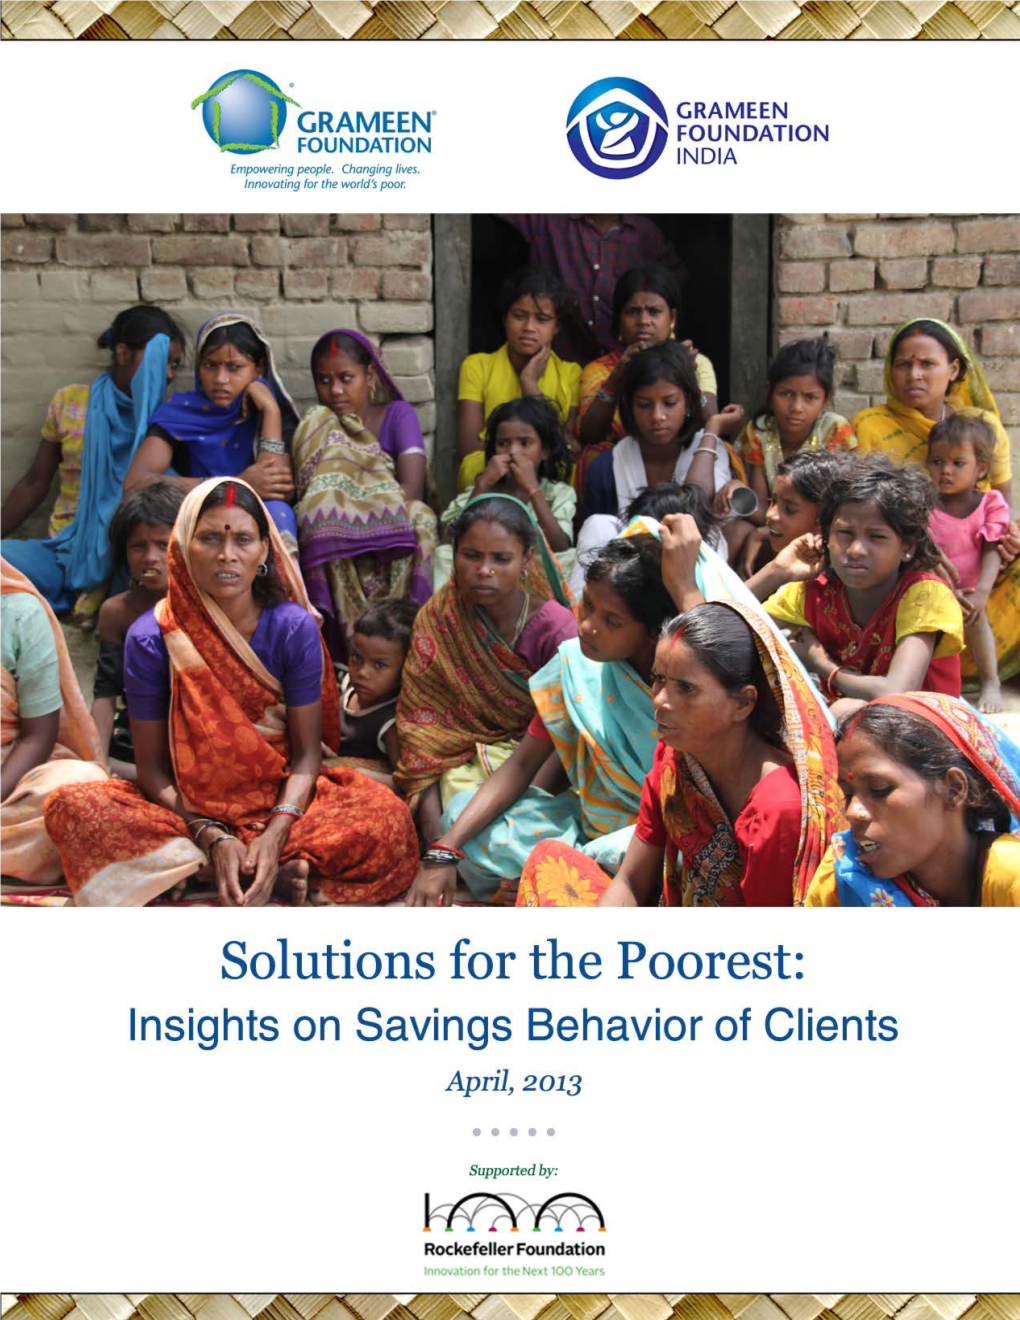 Solution for the Poorest: Insights from Savings Behavior of Clients